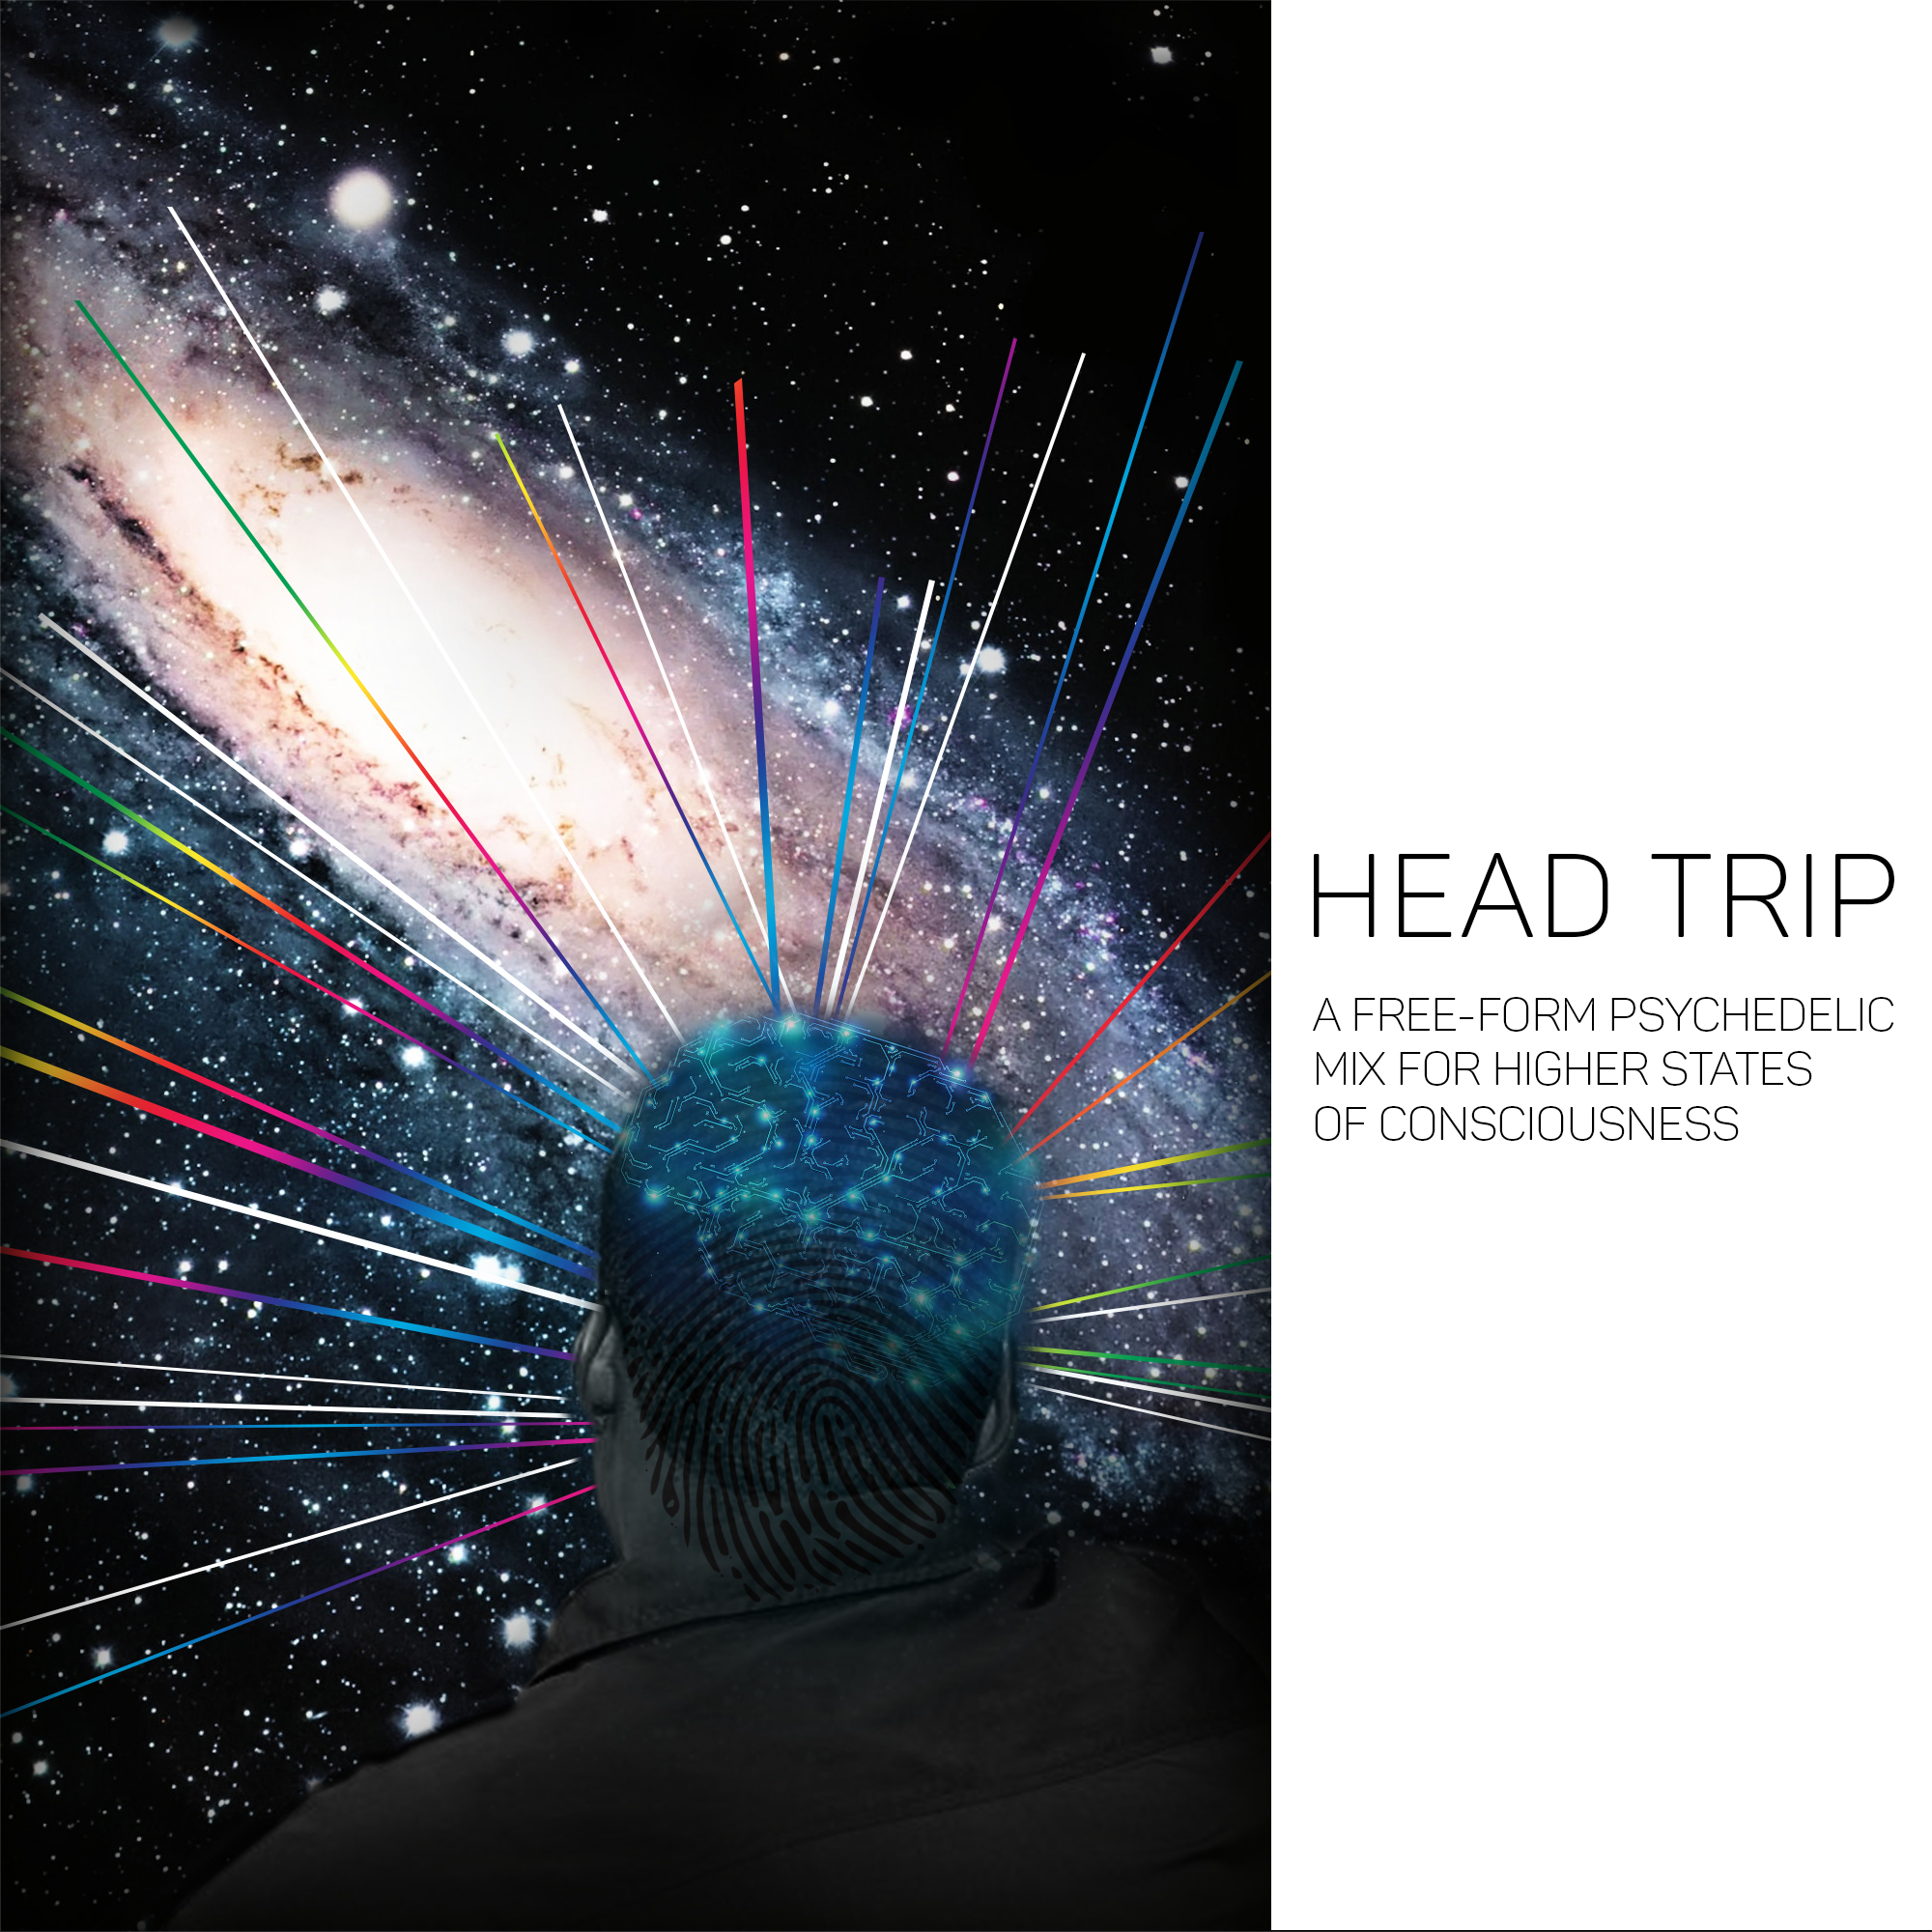 We have a new playlist: Head Trip (A Free Form Psychedelic Mix for Higher States Of Consciousness)